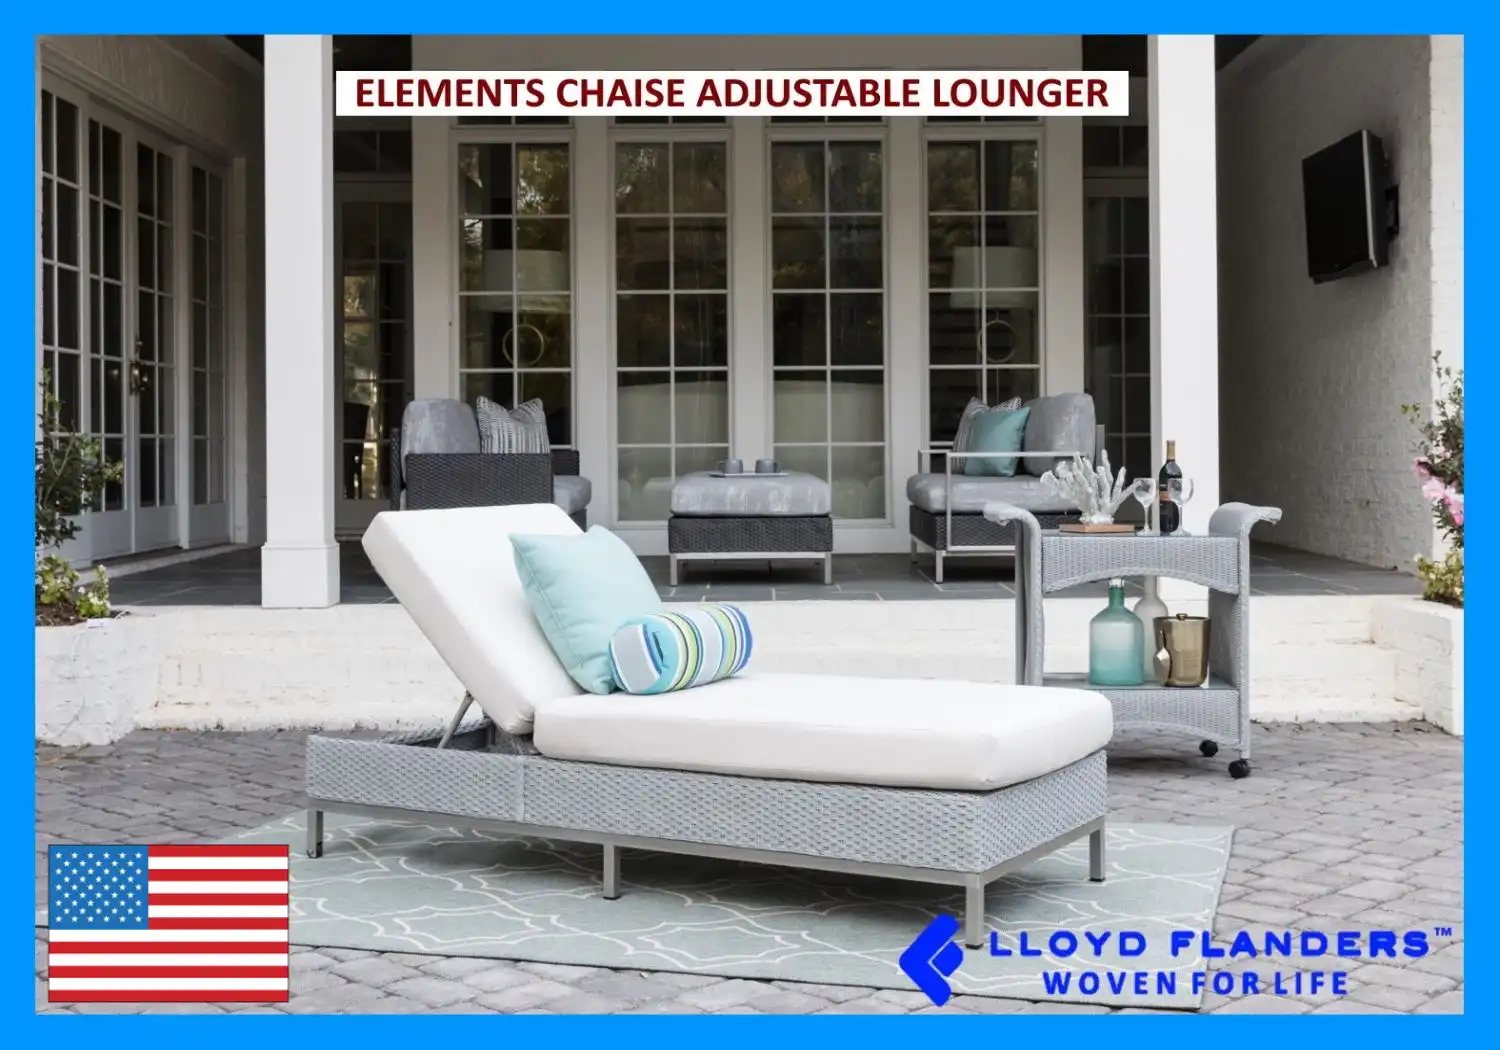 ELEMENTS CHAISE ADJUSTABLE LOUNGER